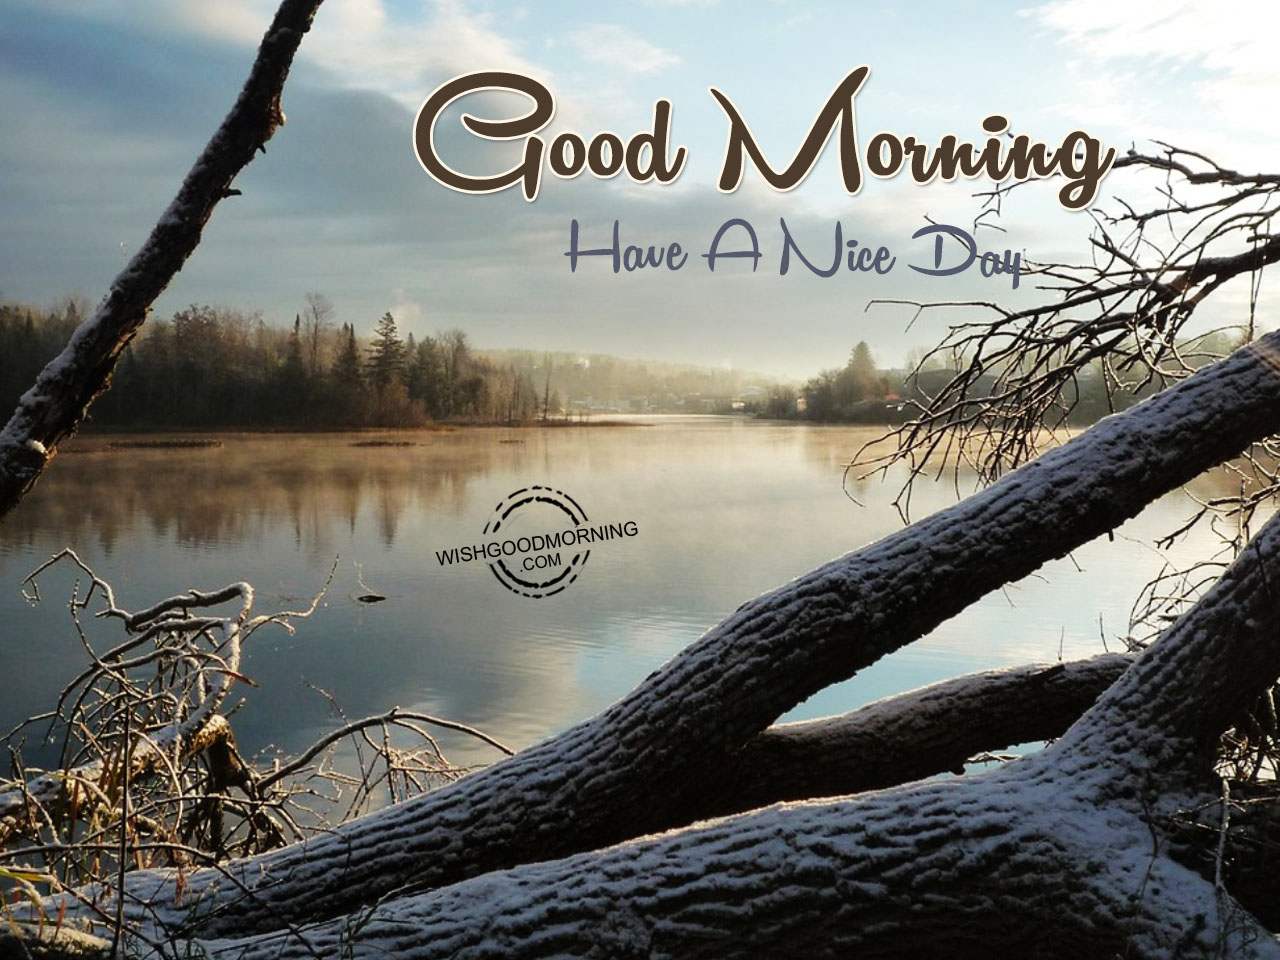 Have A Nice And Wonderful Day – Good Morning - Good Morning ...